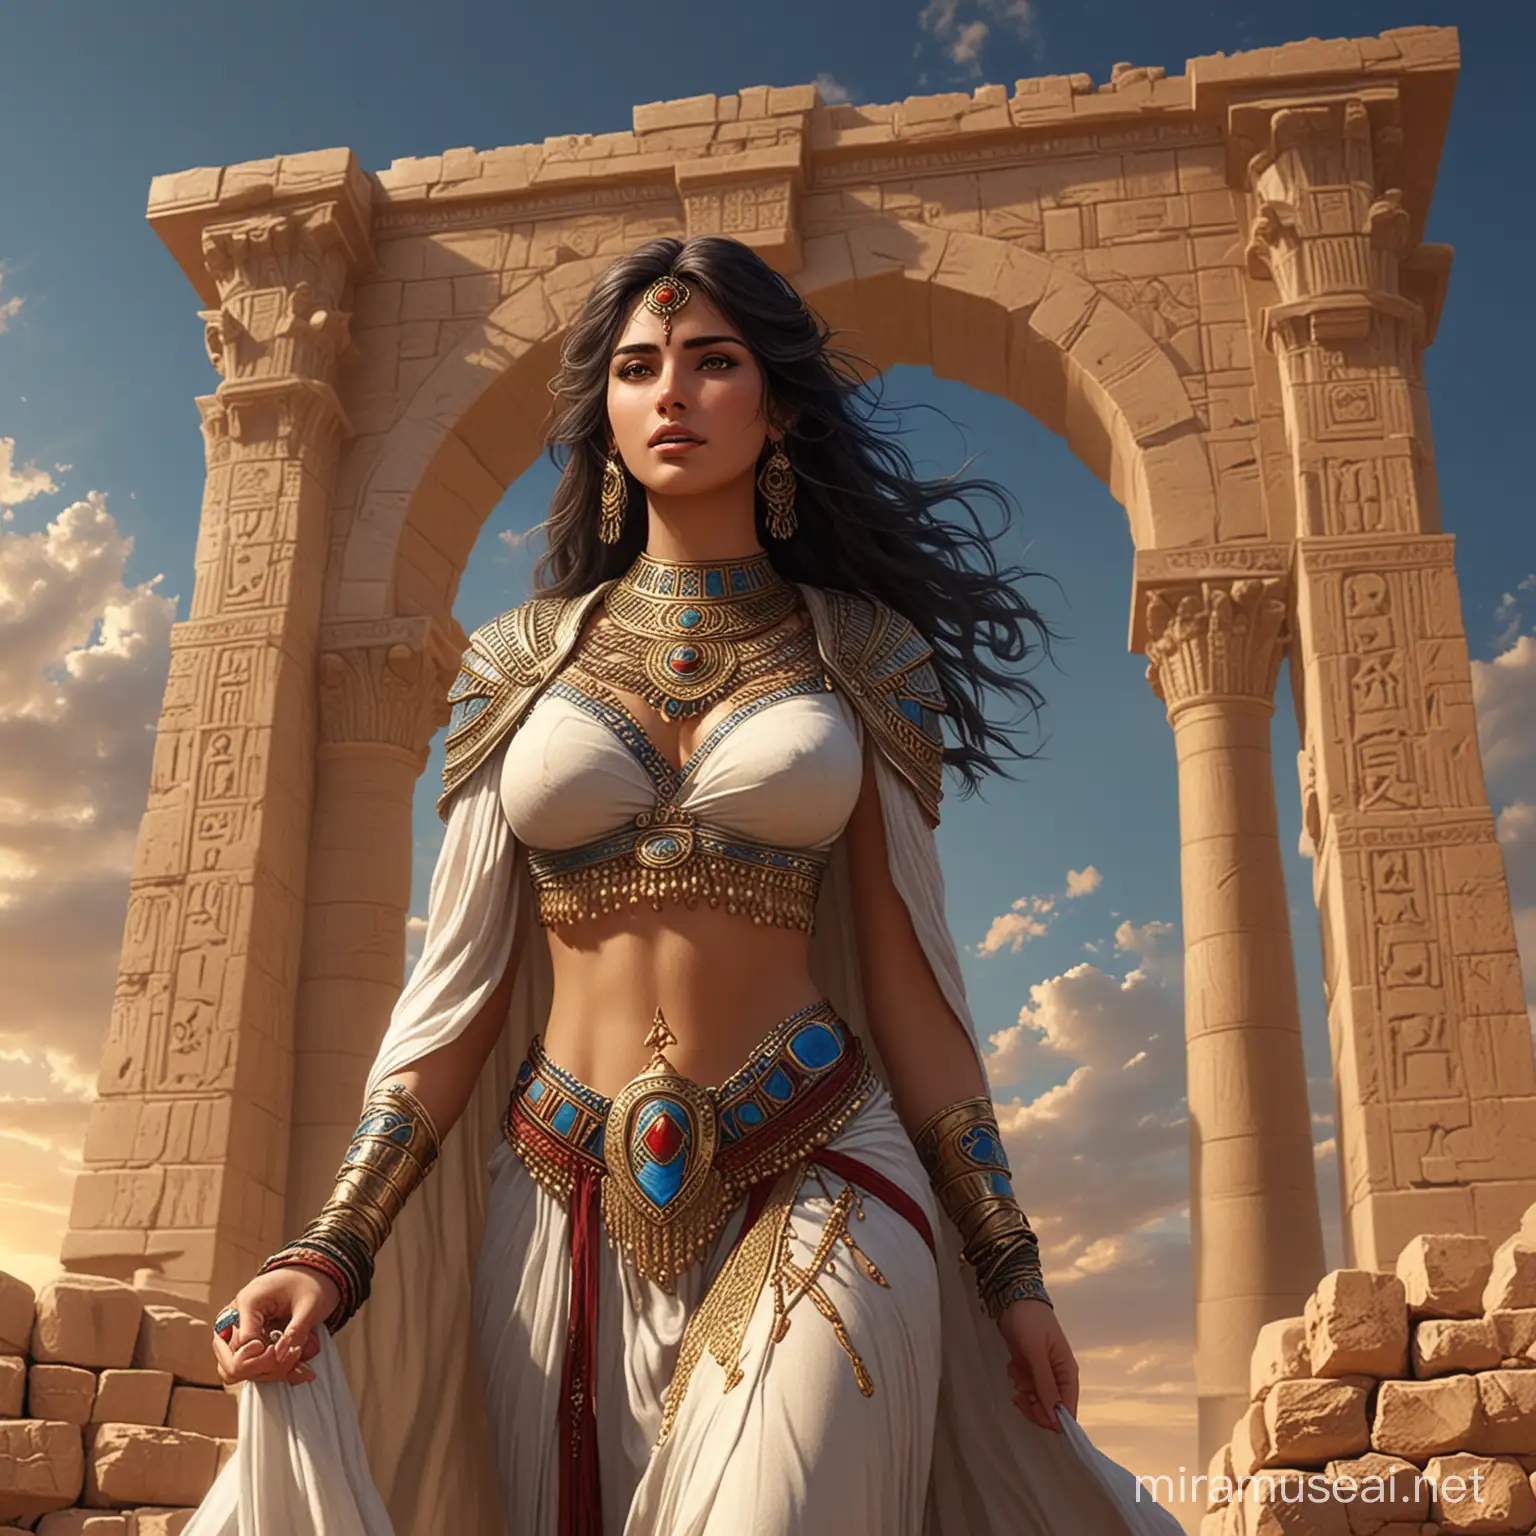 Ishtar GODDESS OF LOVE AND WAR,The image is a CG artwork of a fictional character wearing a garment. The character appears to be a hero and is depicted in an animated style,Babylonia,The image is a painting or drawing of a large stone building with many arches set against a sky background. It resembles a temple or historical structure.